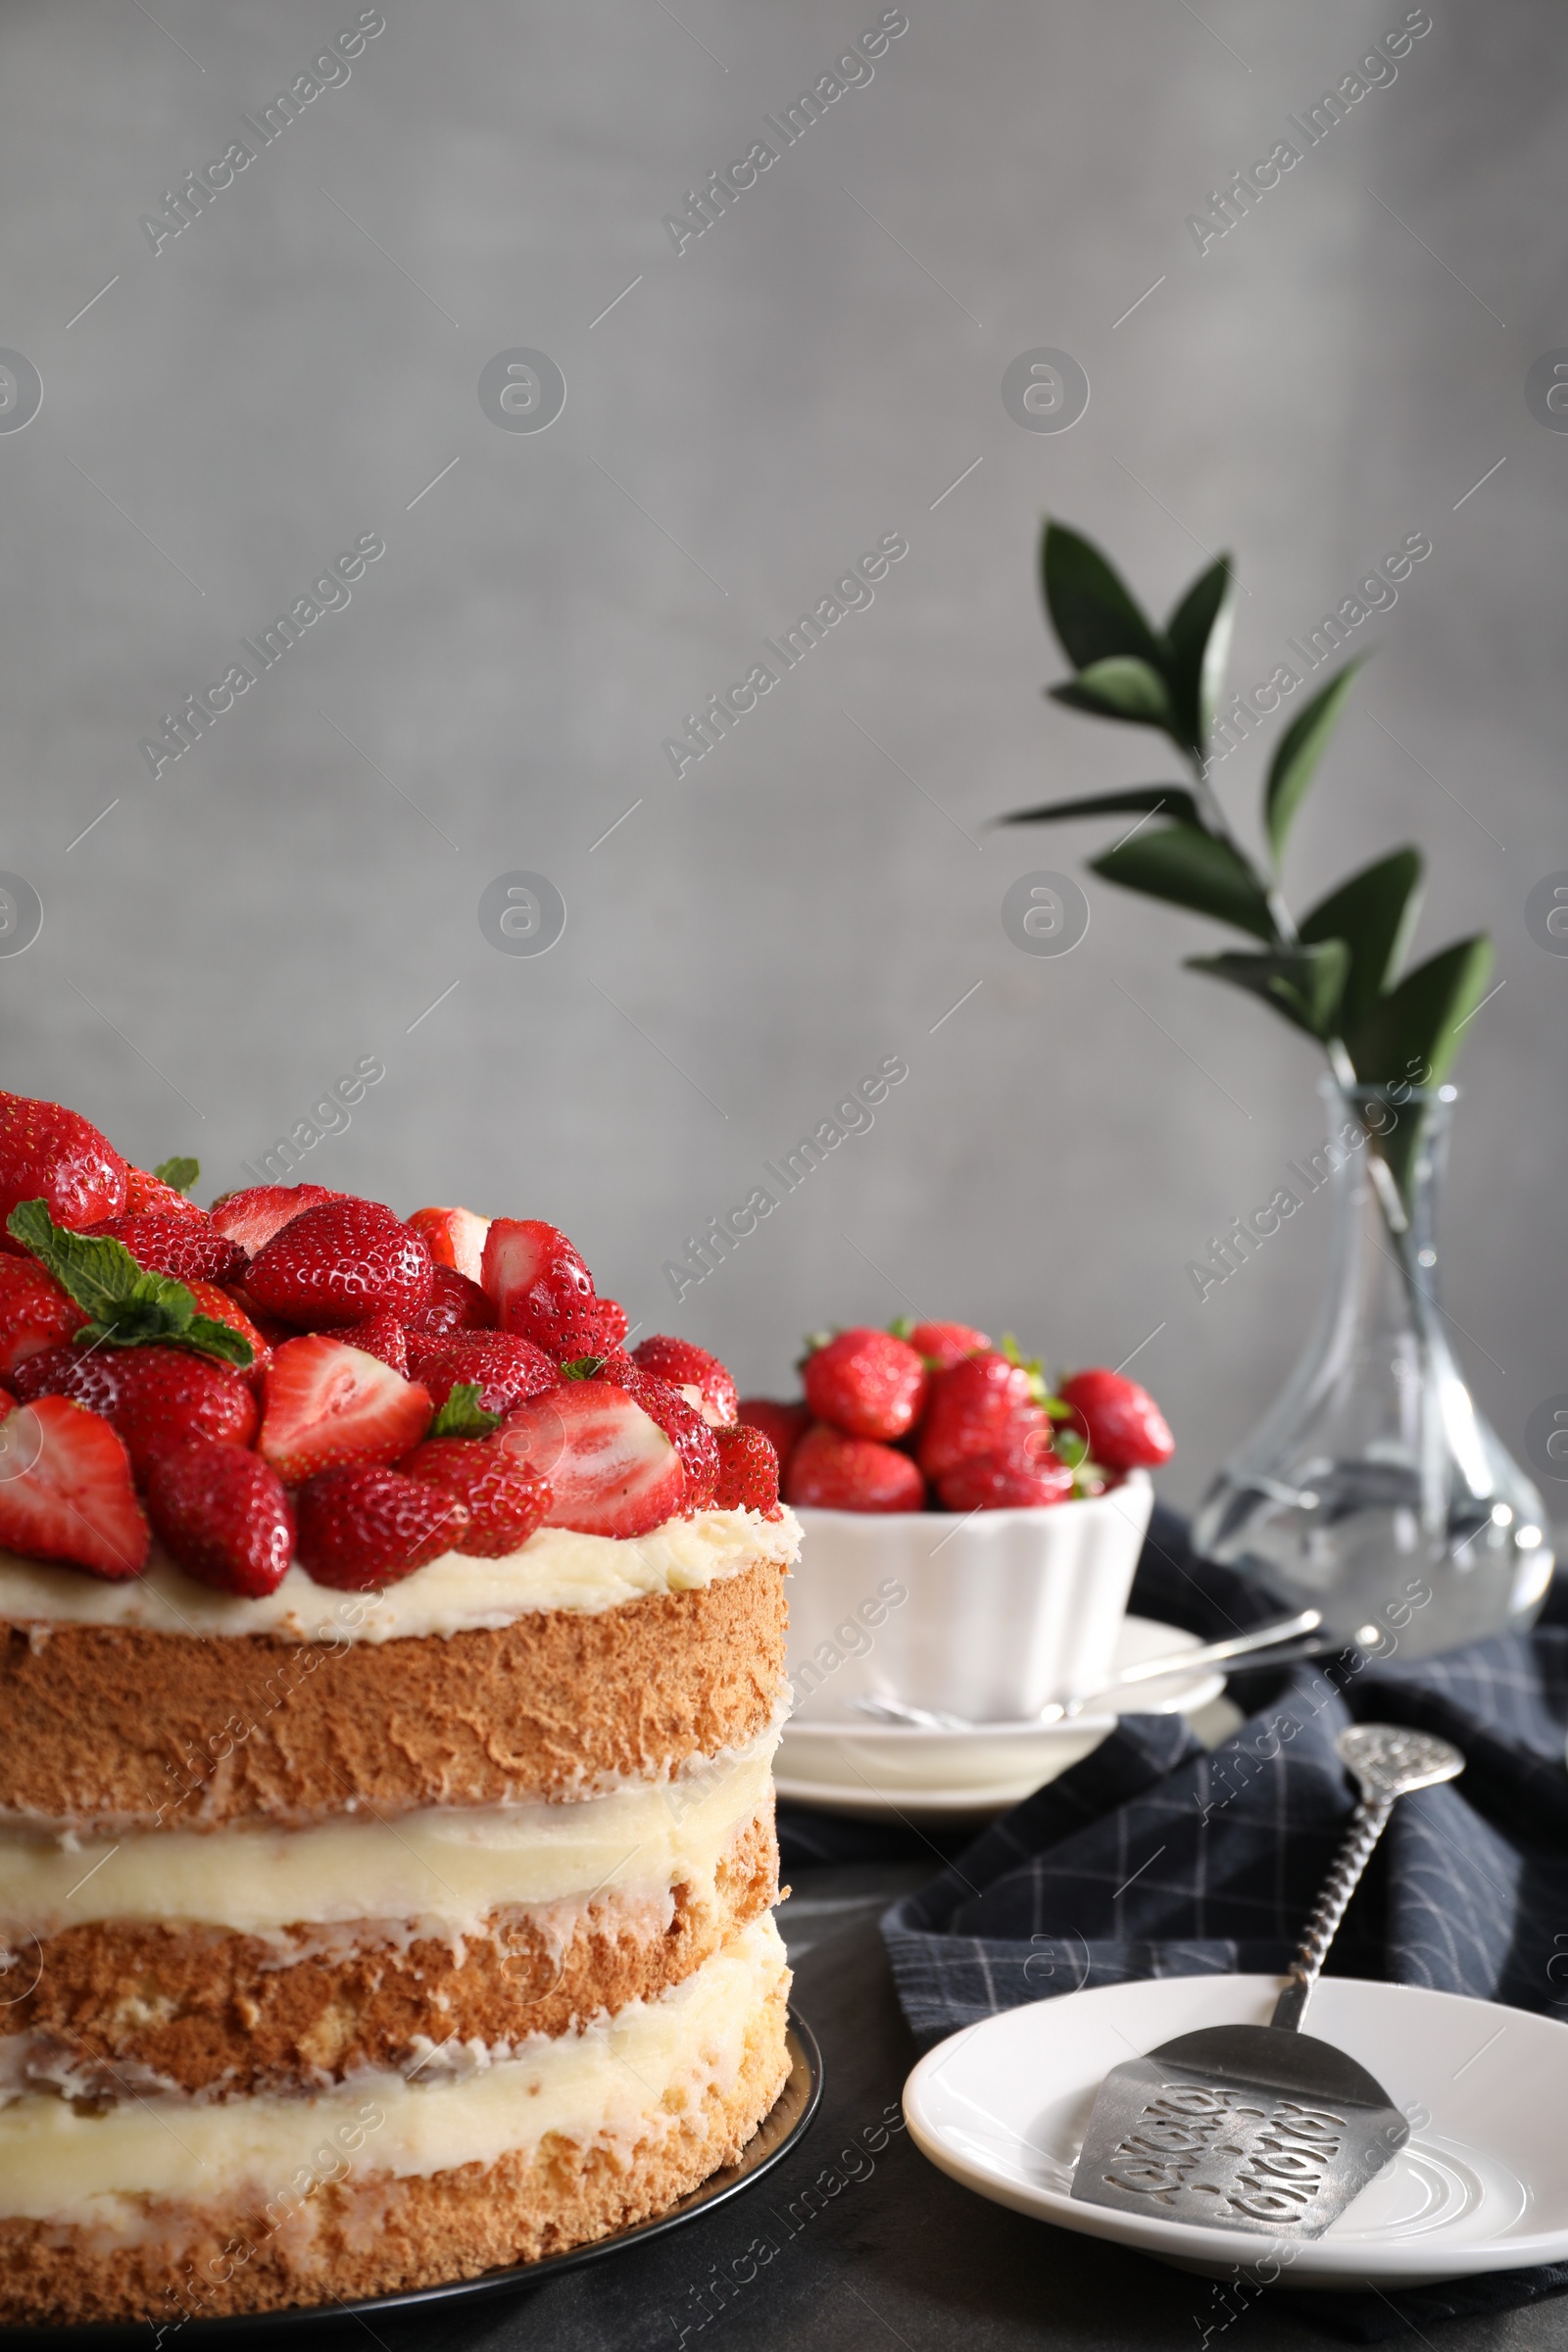 Photo of Tasty cake with fresh strawberries and mint on table against gray background, space copy text